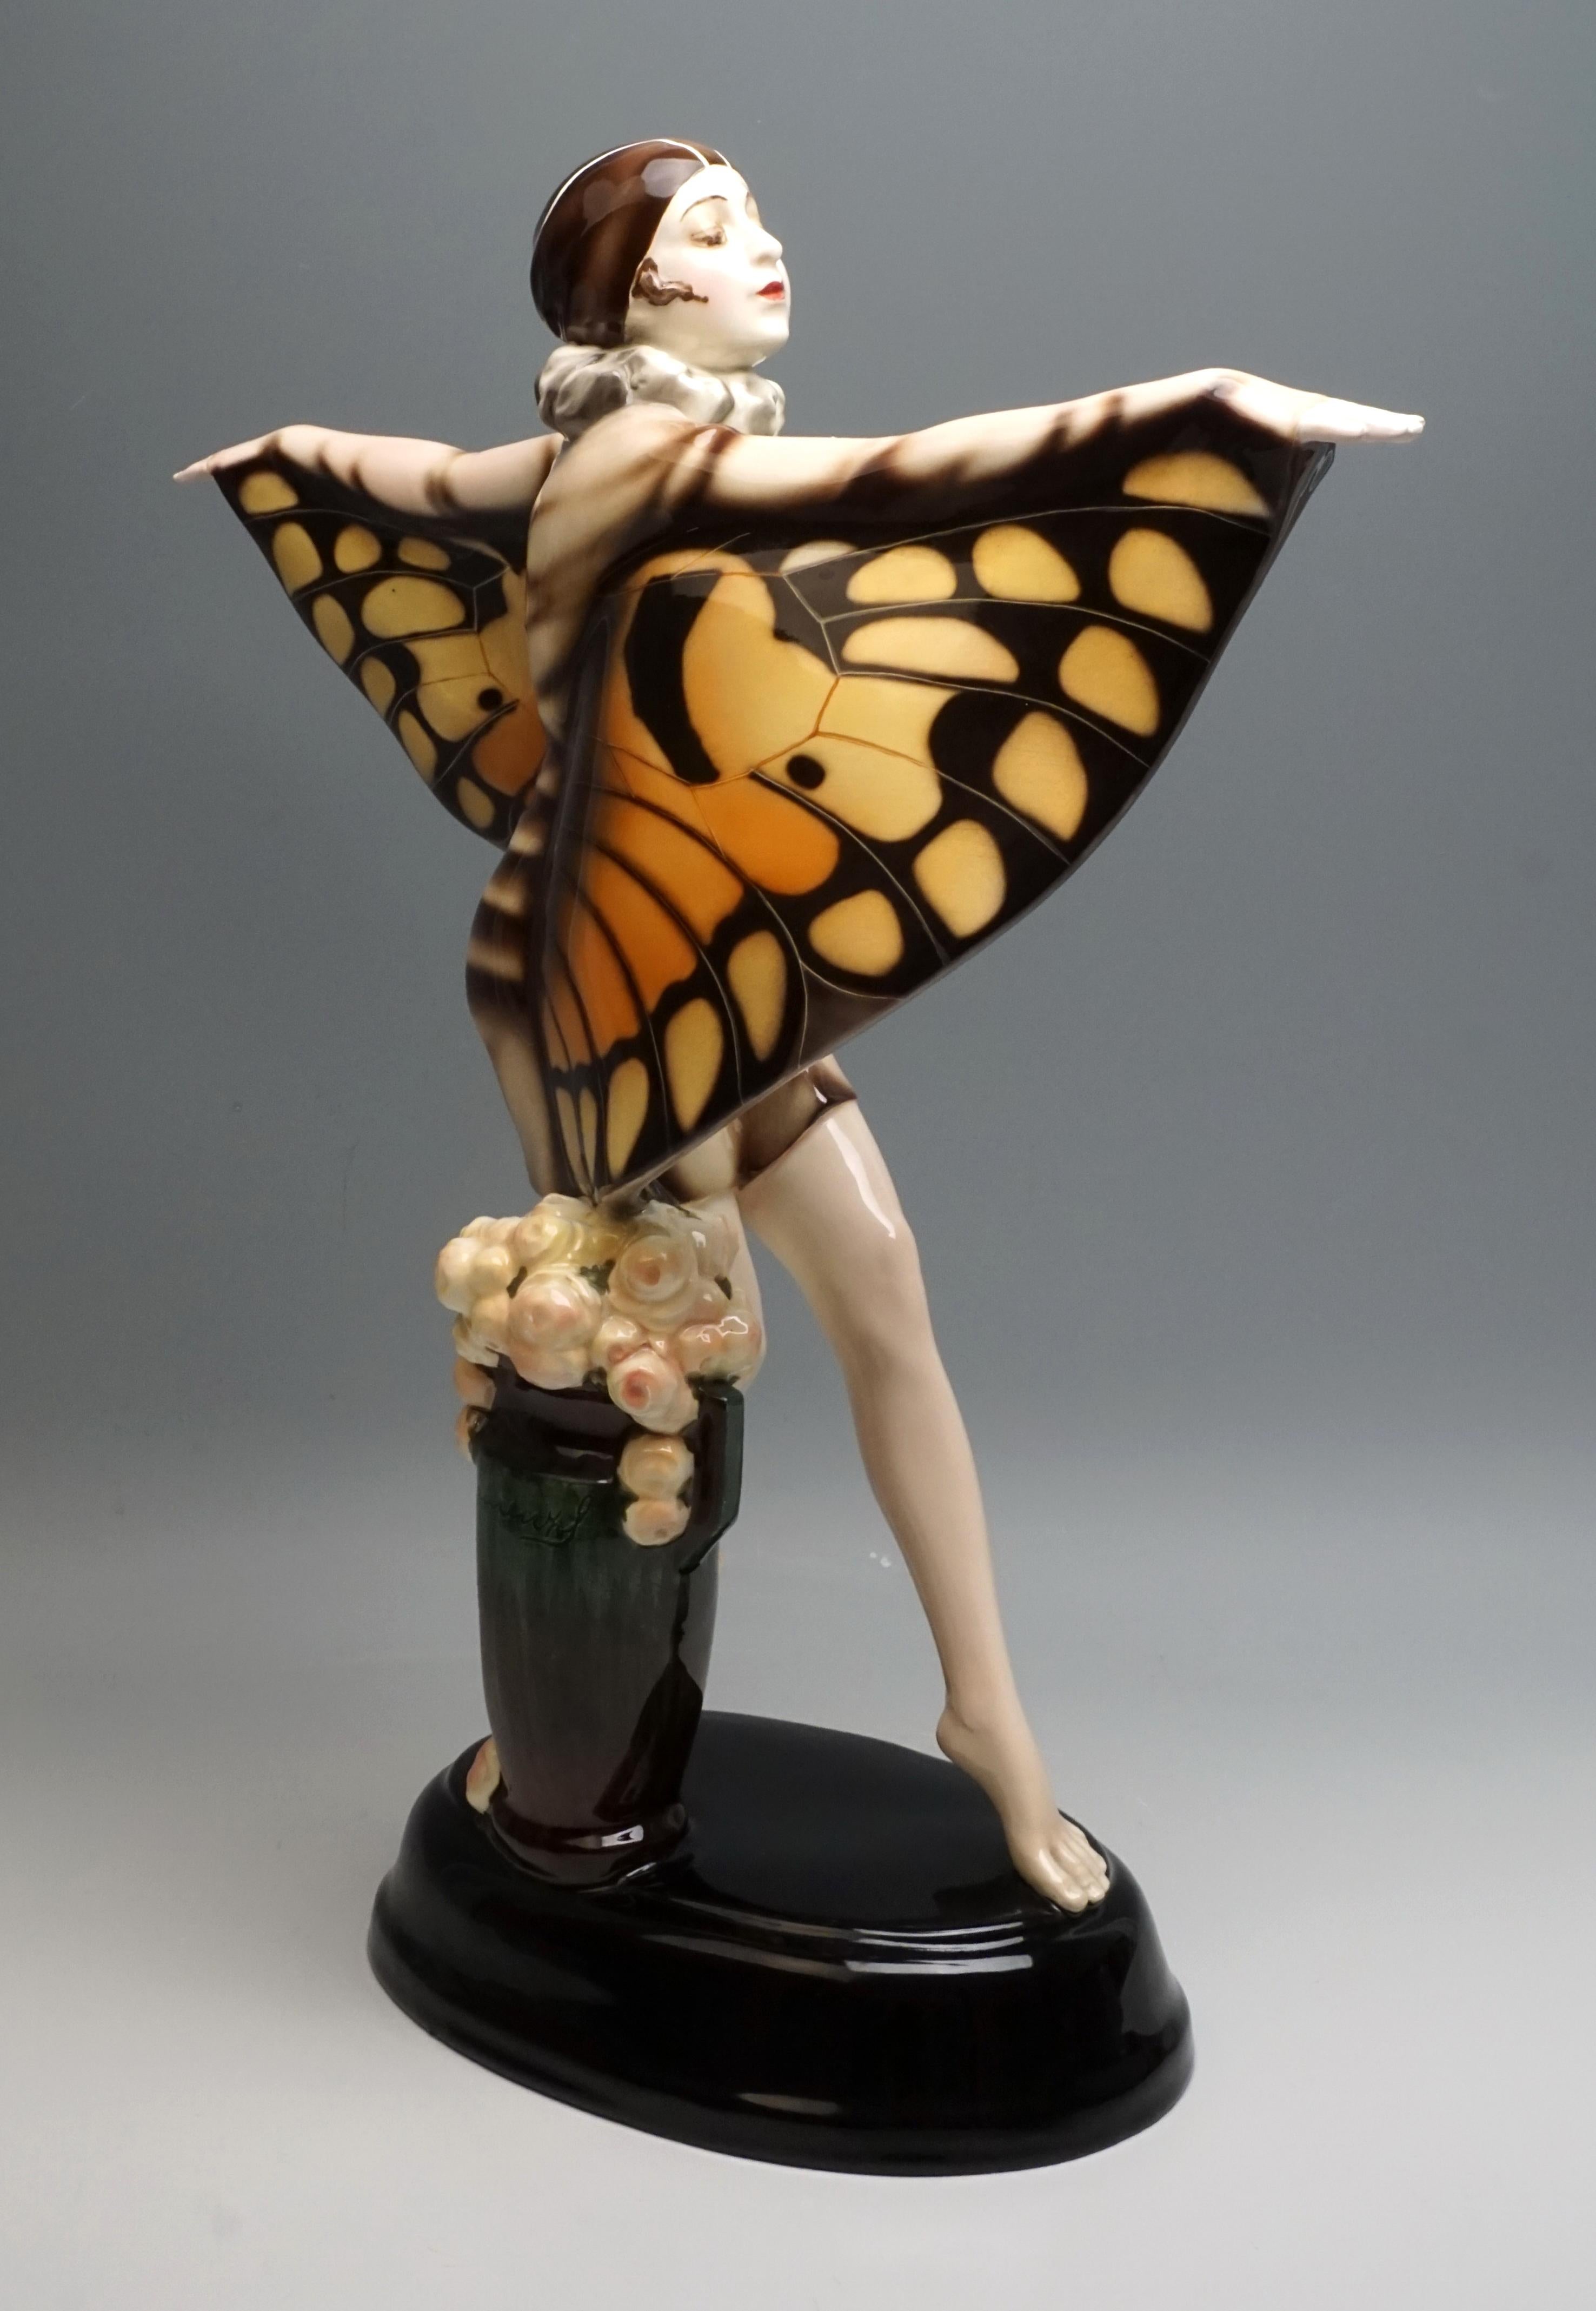 Exceptional large and elegant Goldscheider Art Déco Figurine
The dance 'Der Gefangene Vogel', performed by the dancer Niddy Impekoven (1904-2002) in the early 1920s of the 20th century, is shown: the dancer, balancing on tiptoe, takes a big step